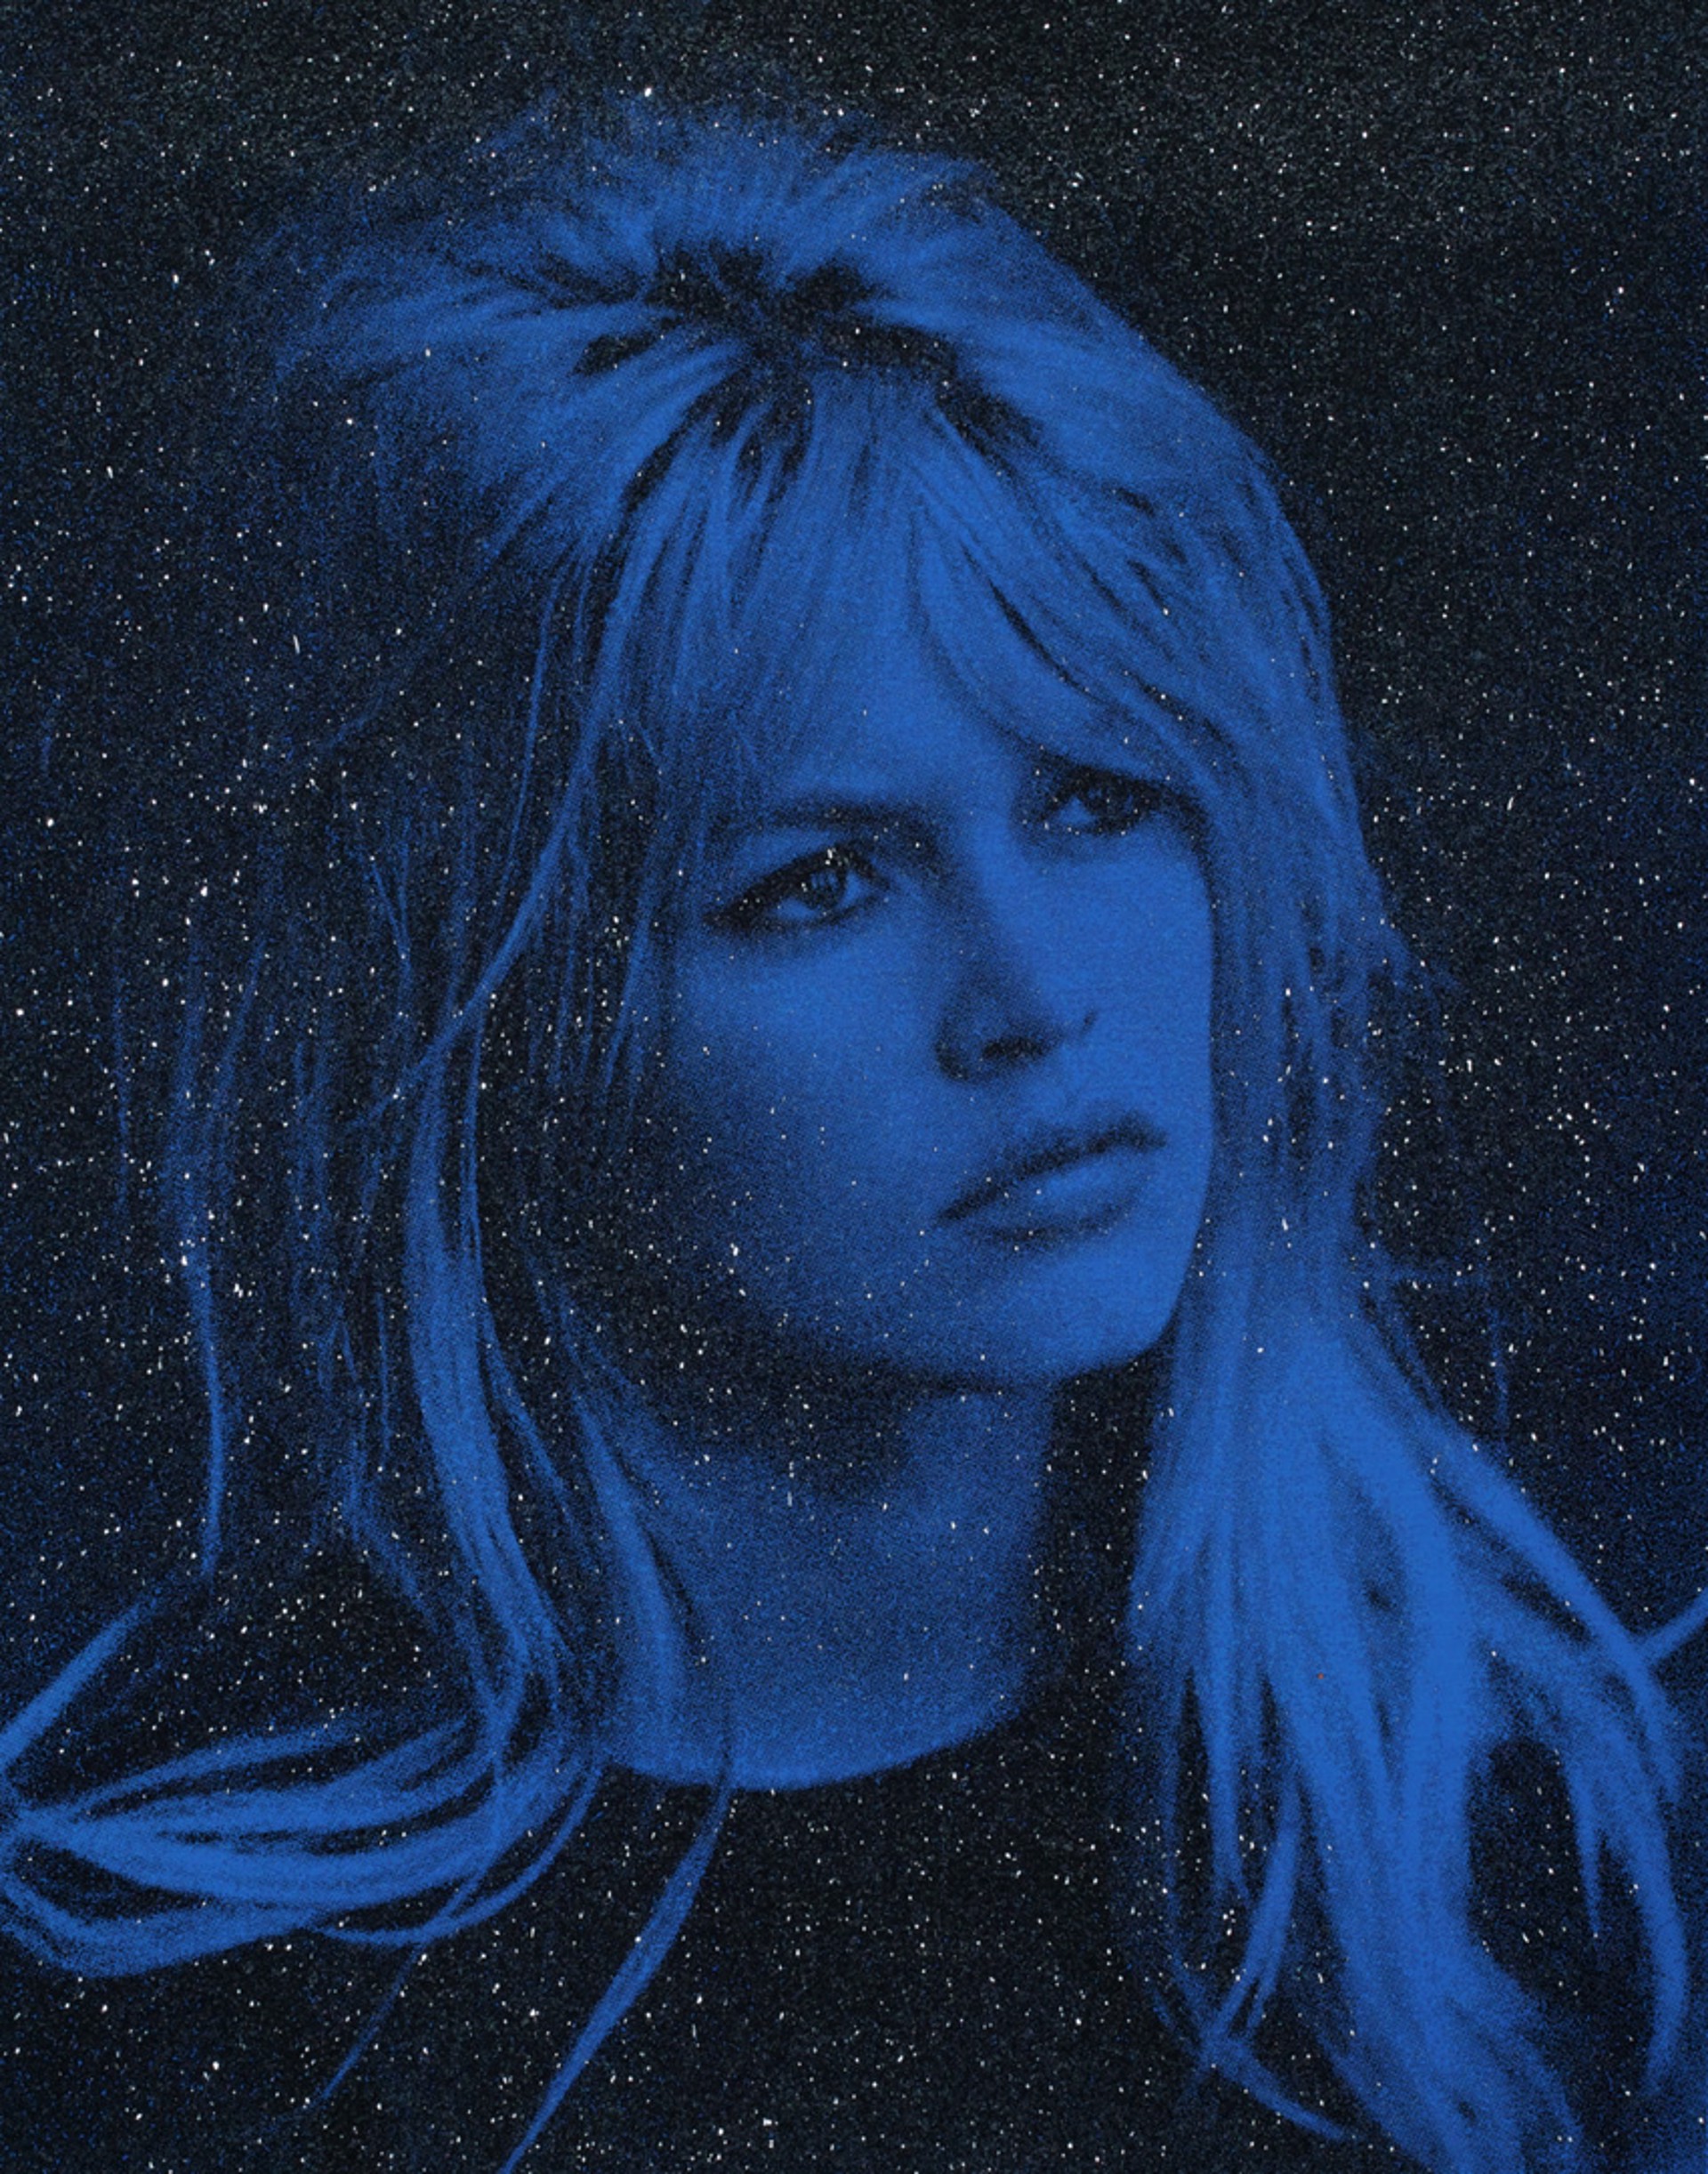 BARDOT-   St. Tropez Royal Bleu- Edition 9/13 by Russell Young